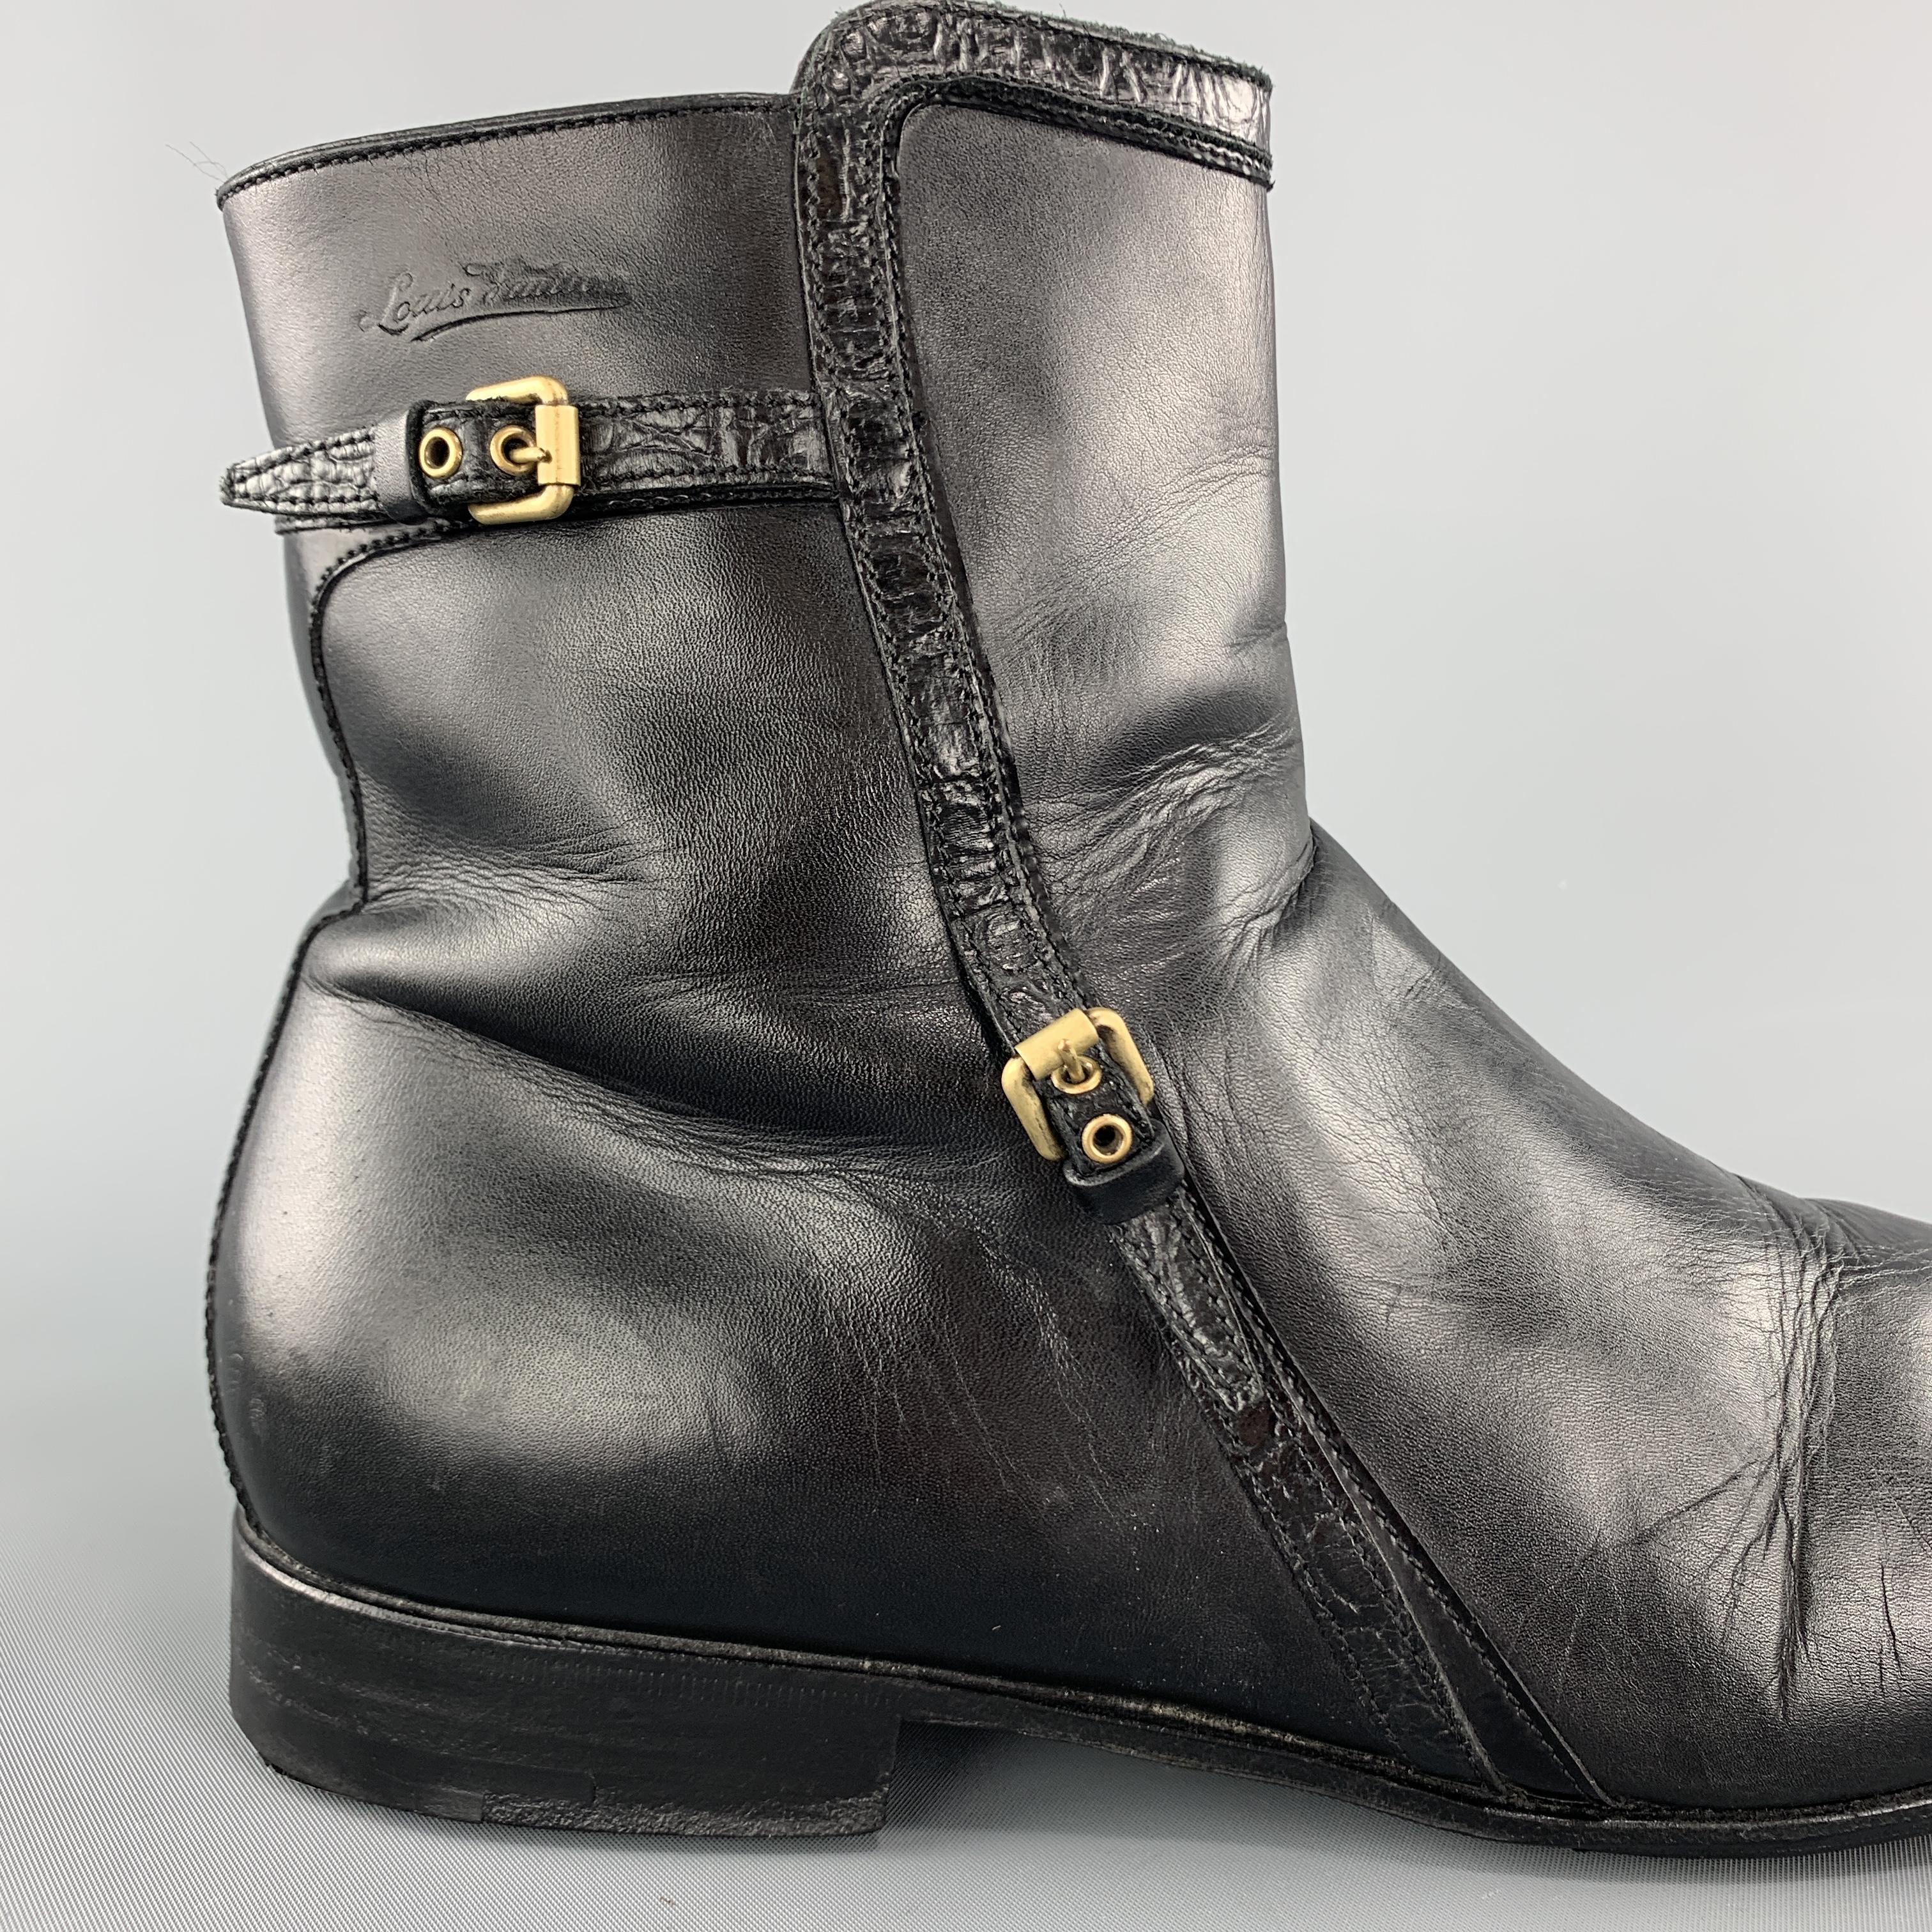 LOUIS VUITTON zip ankle boots come in smooth black leather with a squared off toe, embossed logo, and crocodile embossed patent leather piping with gold tone buckled belt details. Wear on toes. Made in Italy.

Good Pre-Owned Condition.
Marked: UK